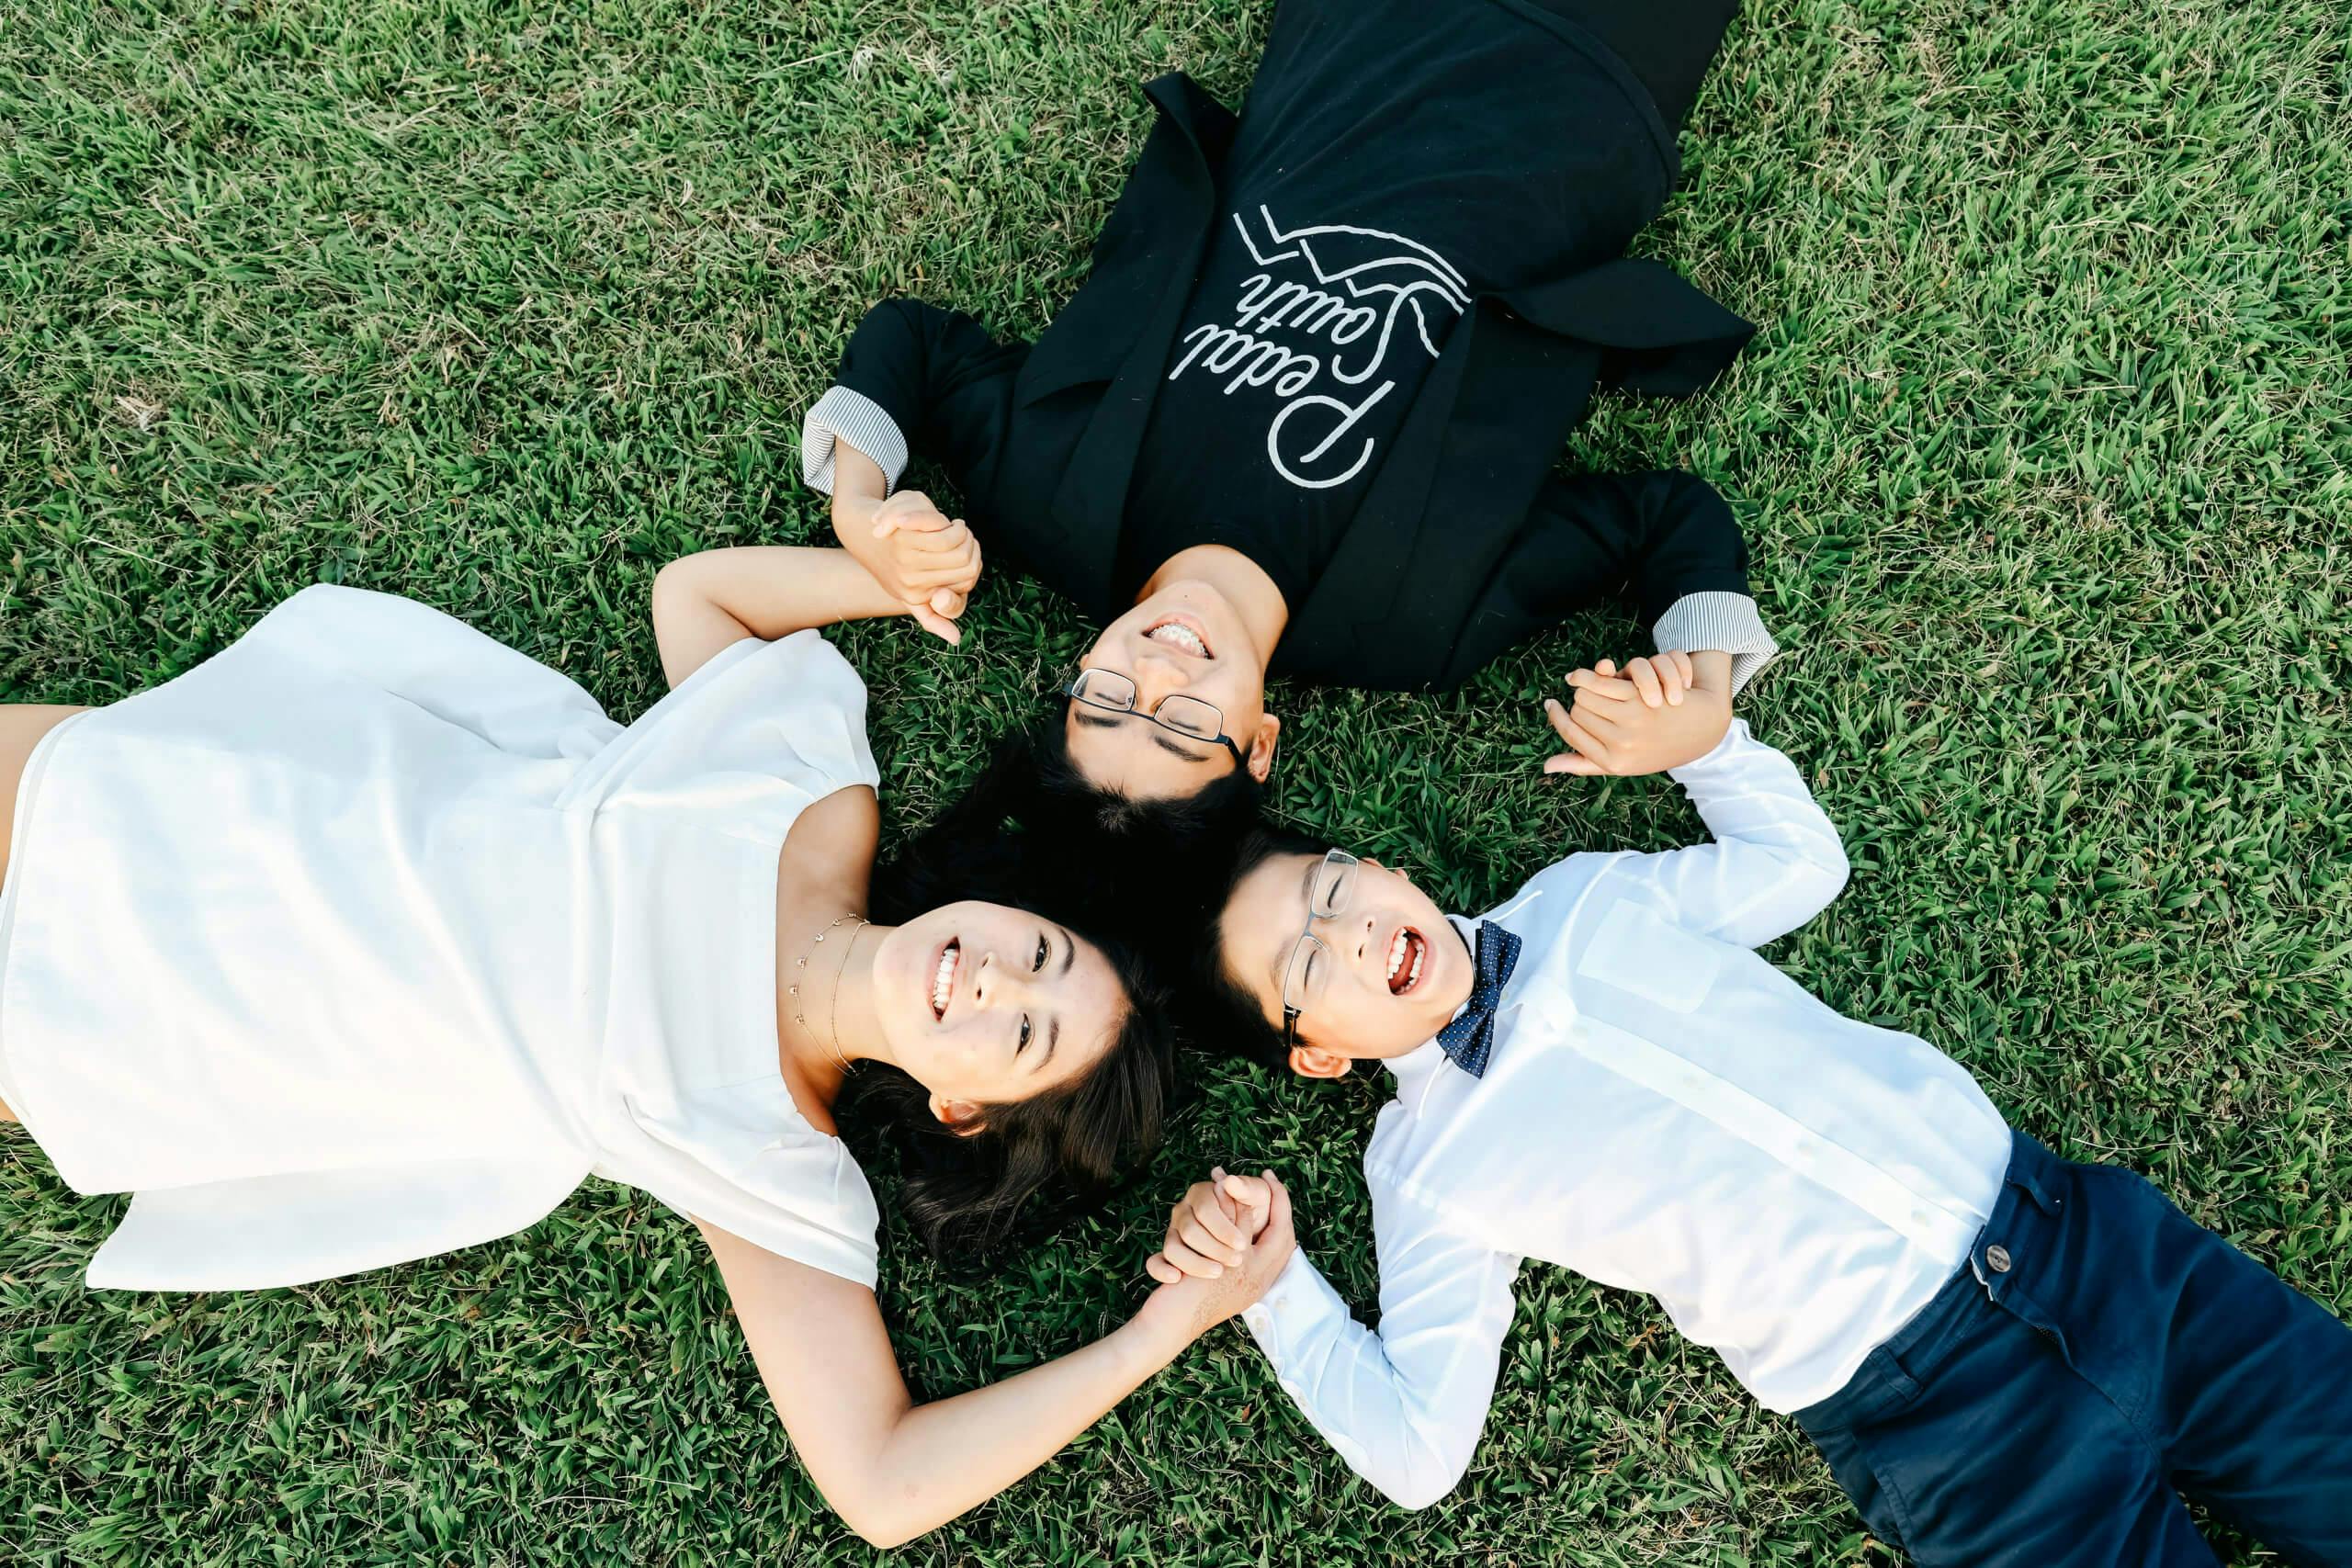 Three people lying on grass and holding hands, looking upwards